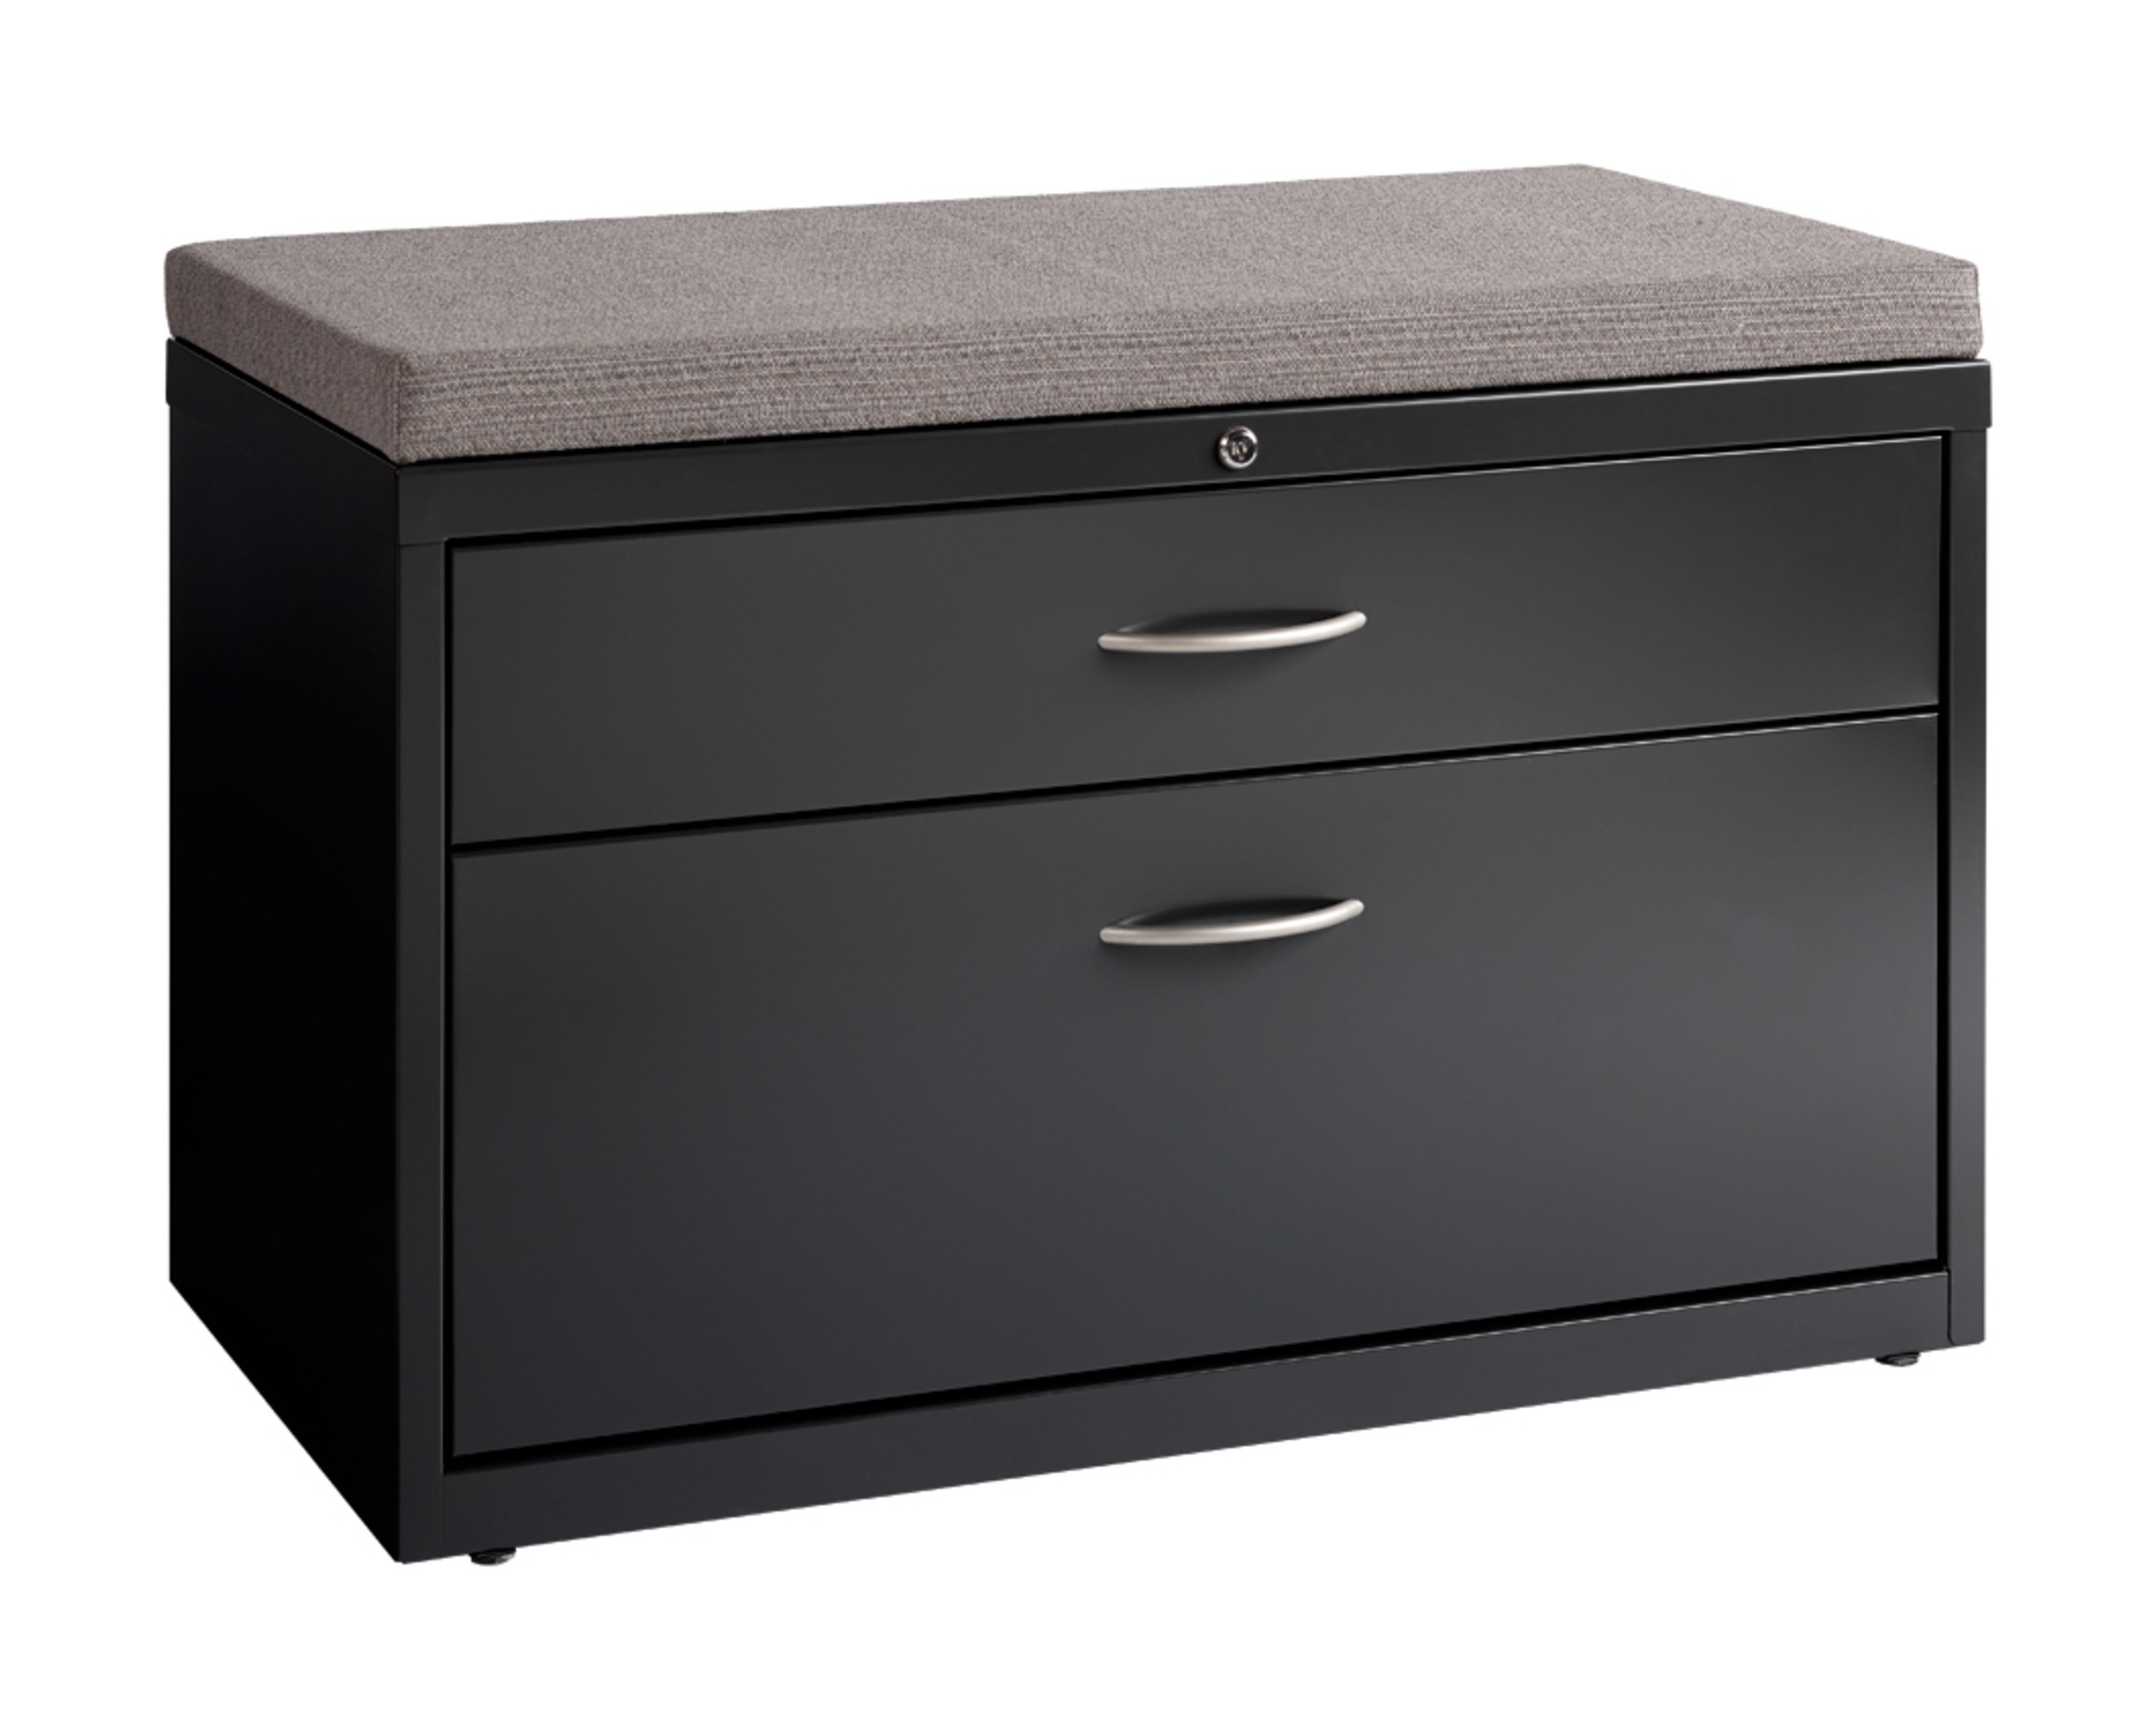 Hirsh Industries B2248135 36 in. Low Credenza with Box & File Drawers - Charcoal - image 4 of 13